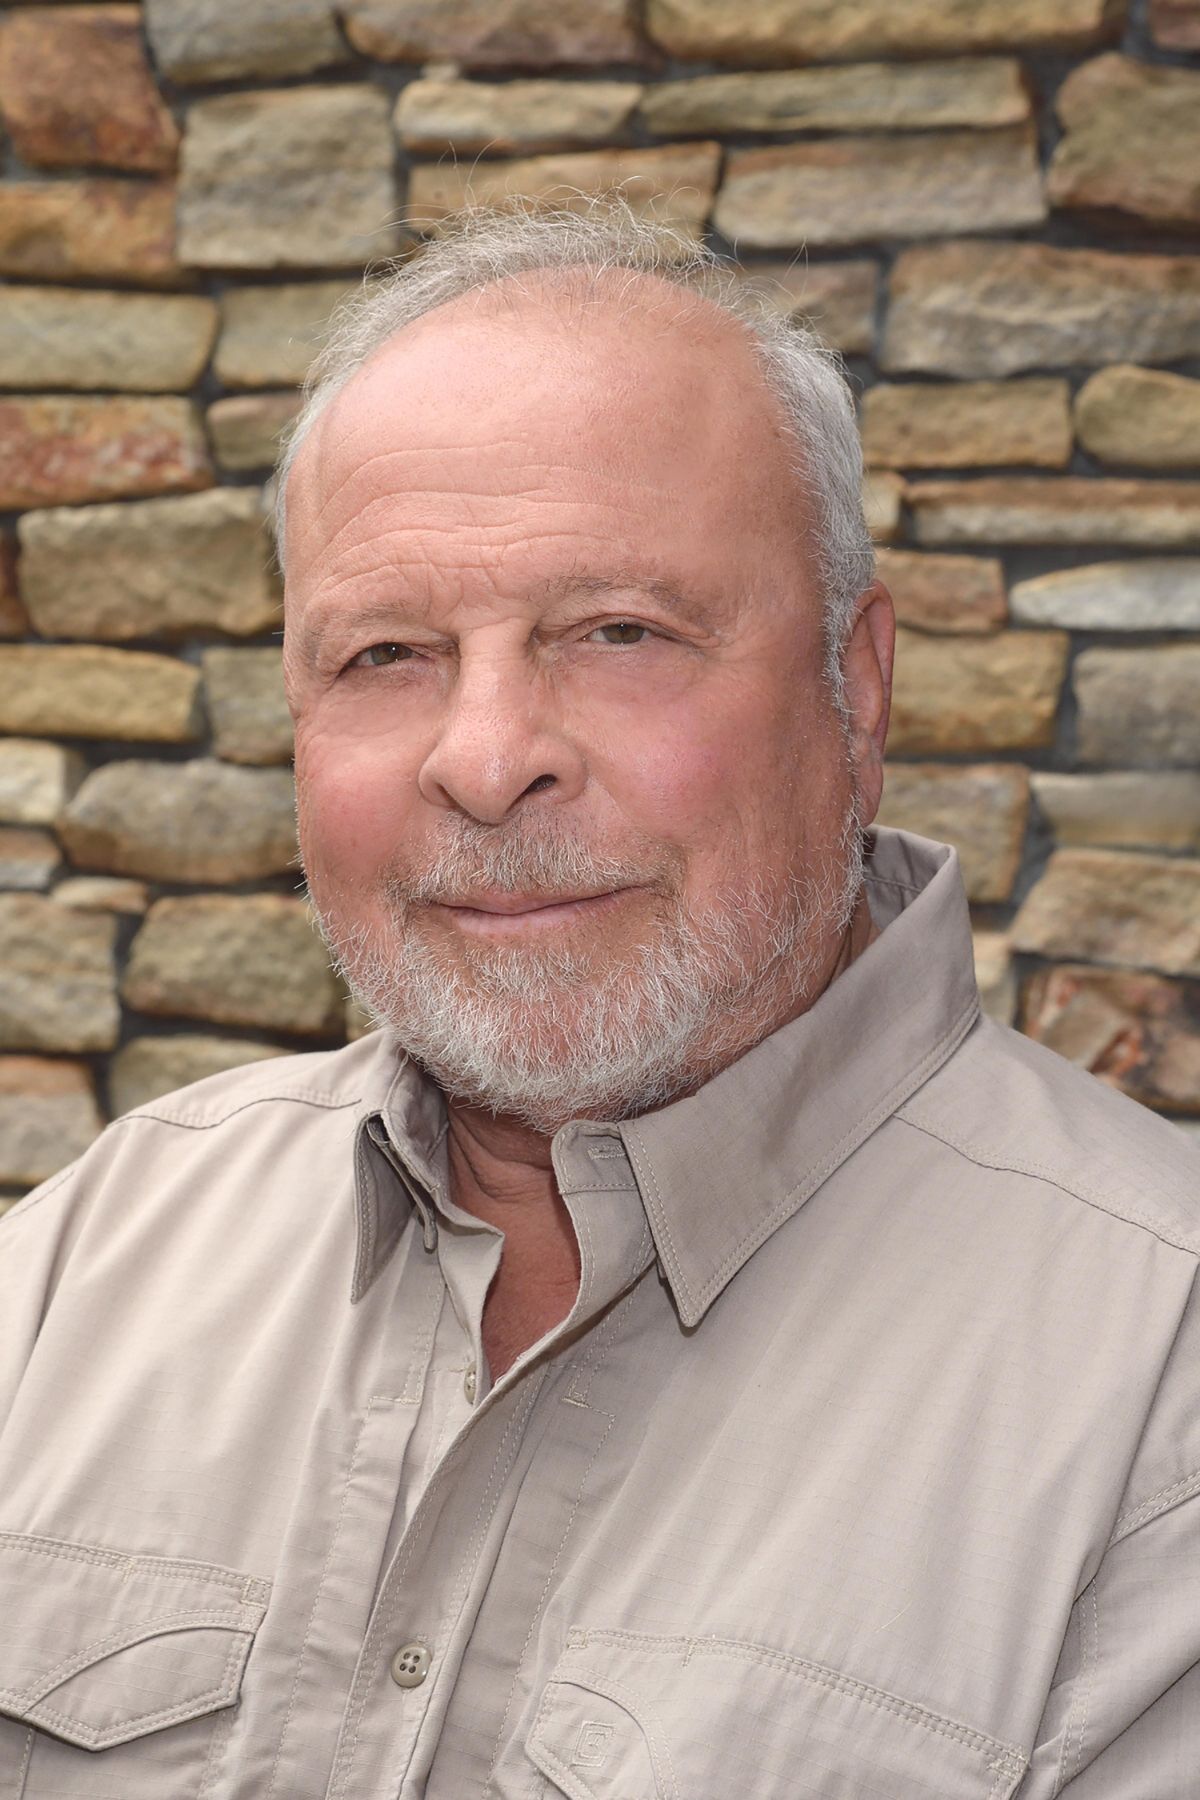 Talk and Book Signing with Bestselling Author Nelson DeMille